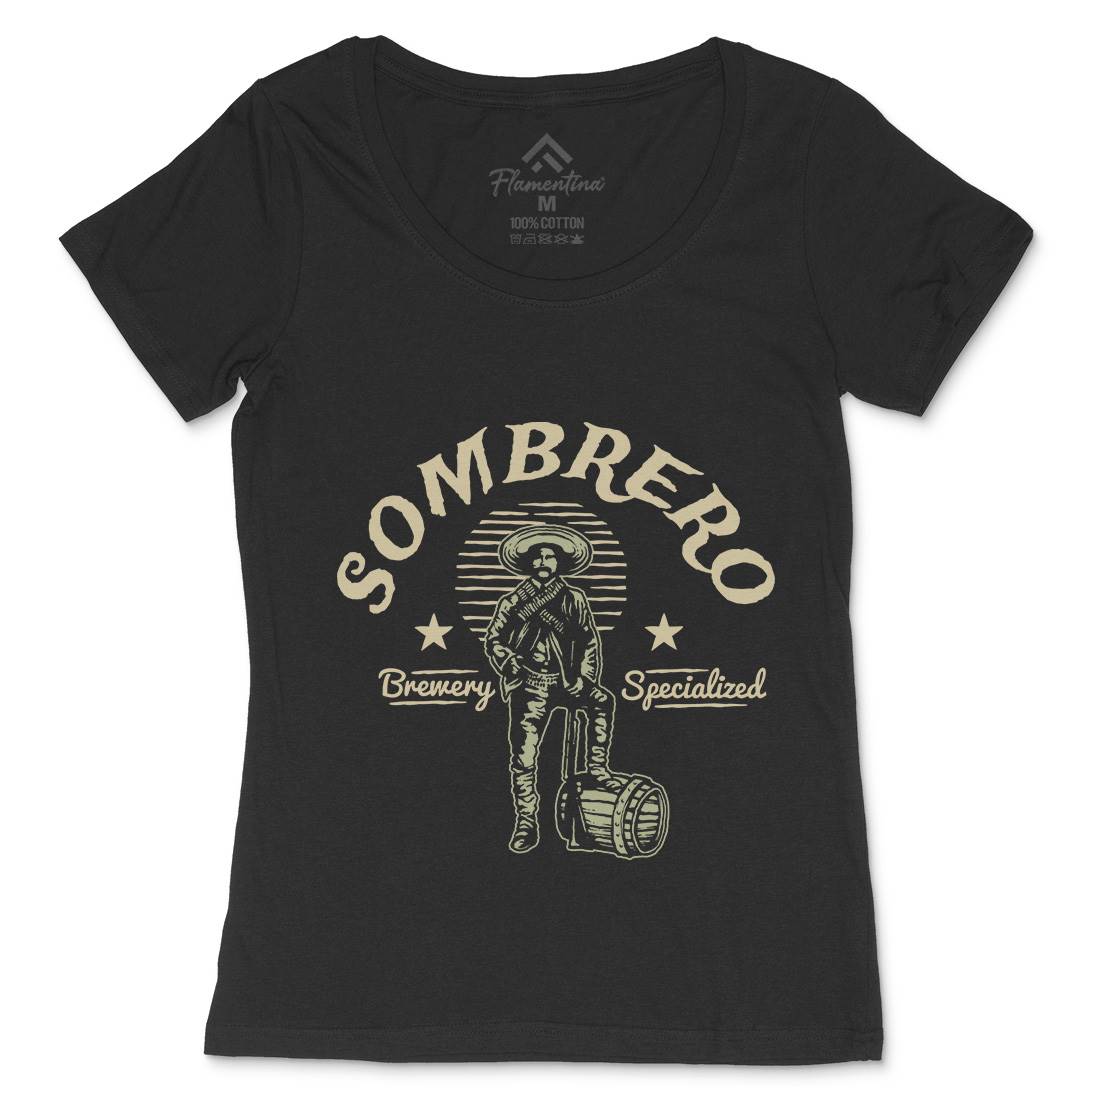 Sombrero Brewery Womens Scoop Neck T-Shirt American A369